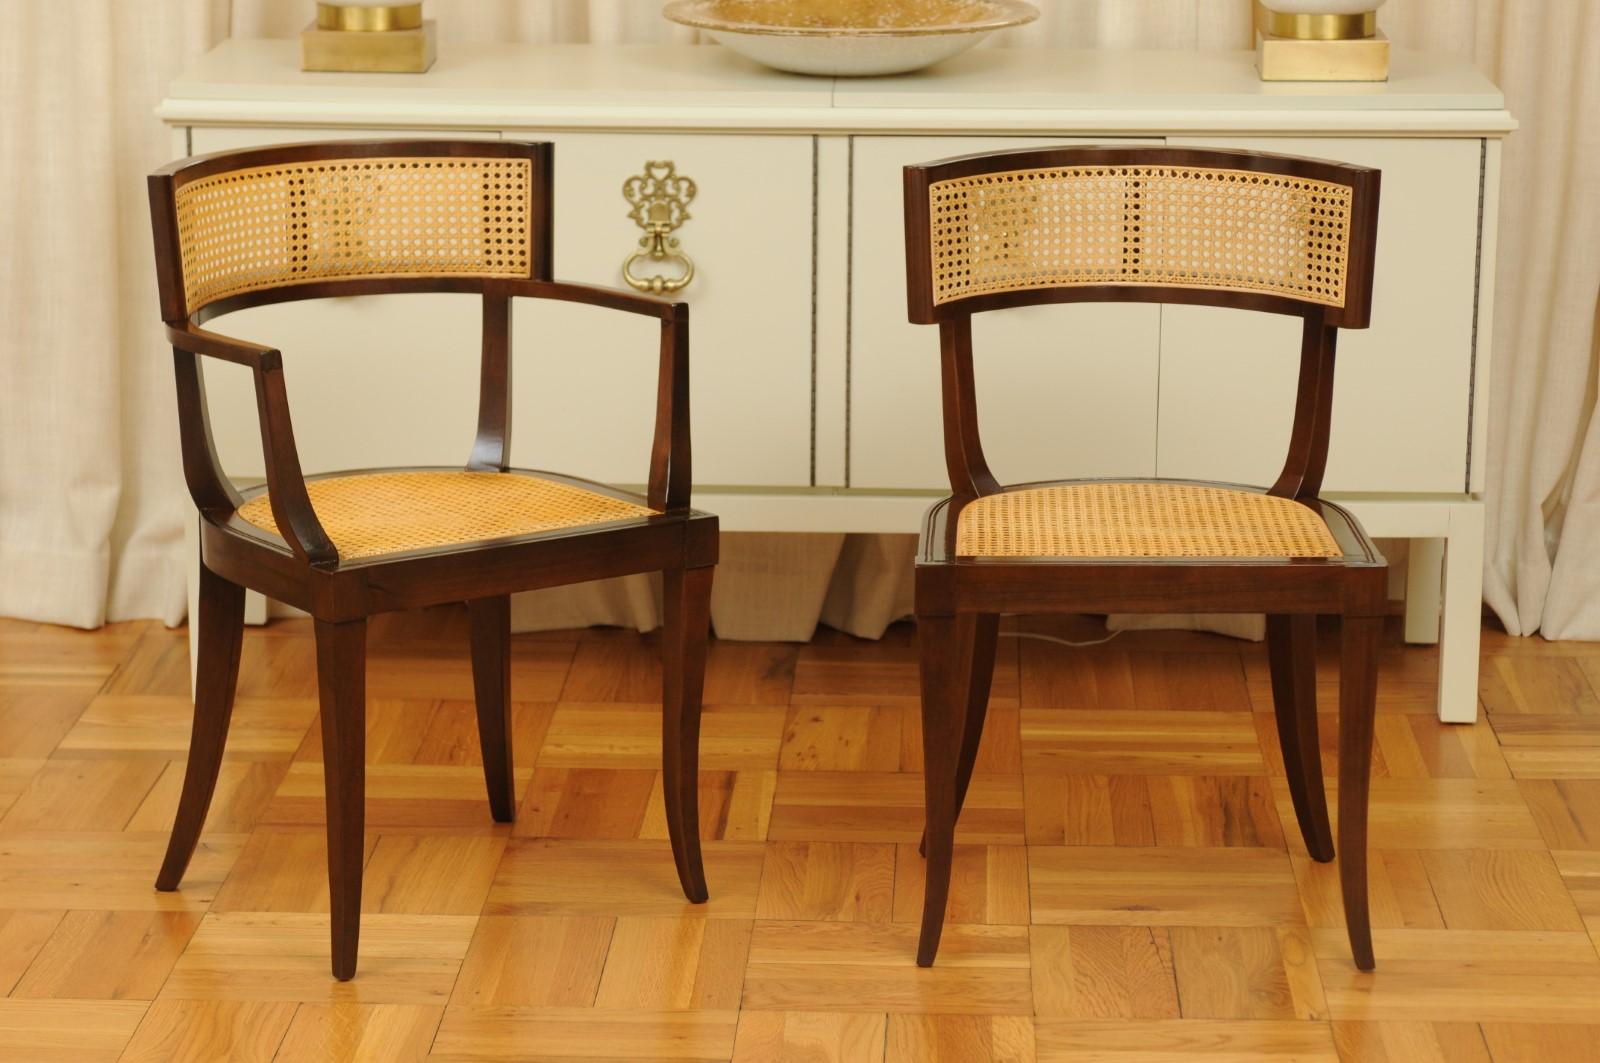 These magnificent dining chairs are shipped as professionally photographed and described in the listing narrative: Meticulously professionally restored and completely installation ready. This large set is unique on the World market. Please inquire